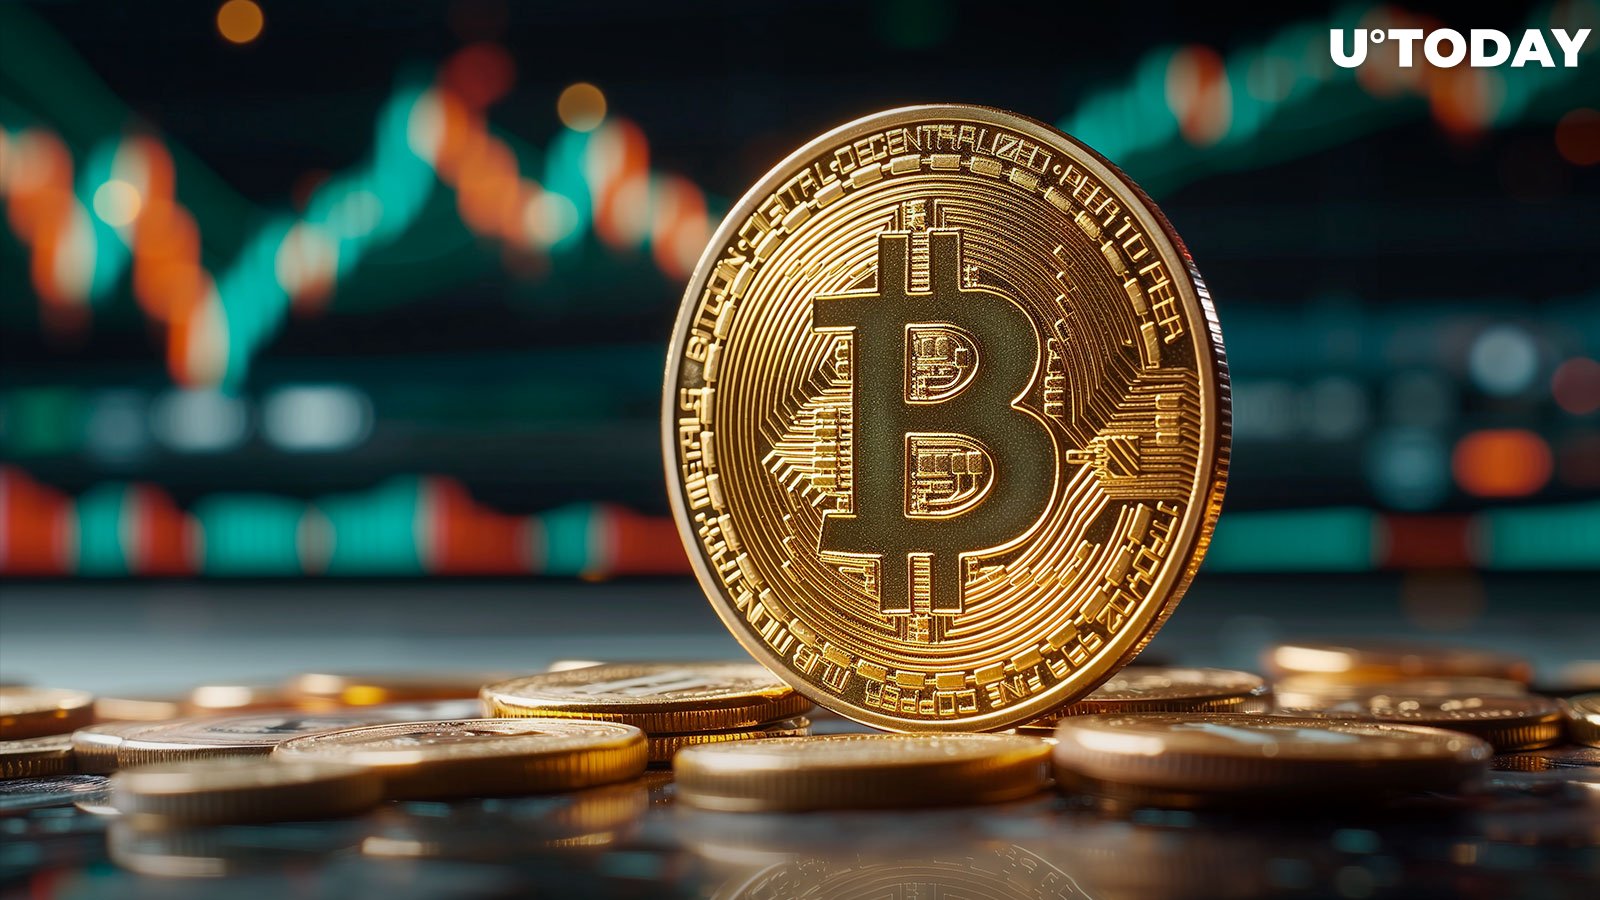 Bitcoin (BTC) Breakout Has Strong February 2017 Vibes: Top Trader